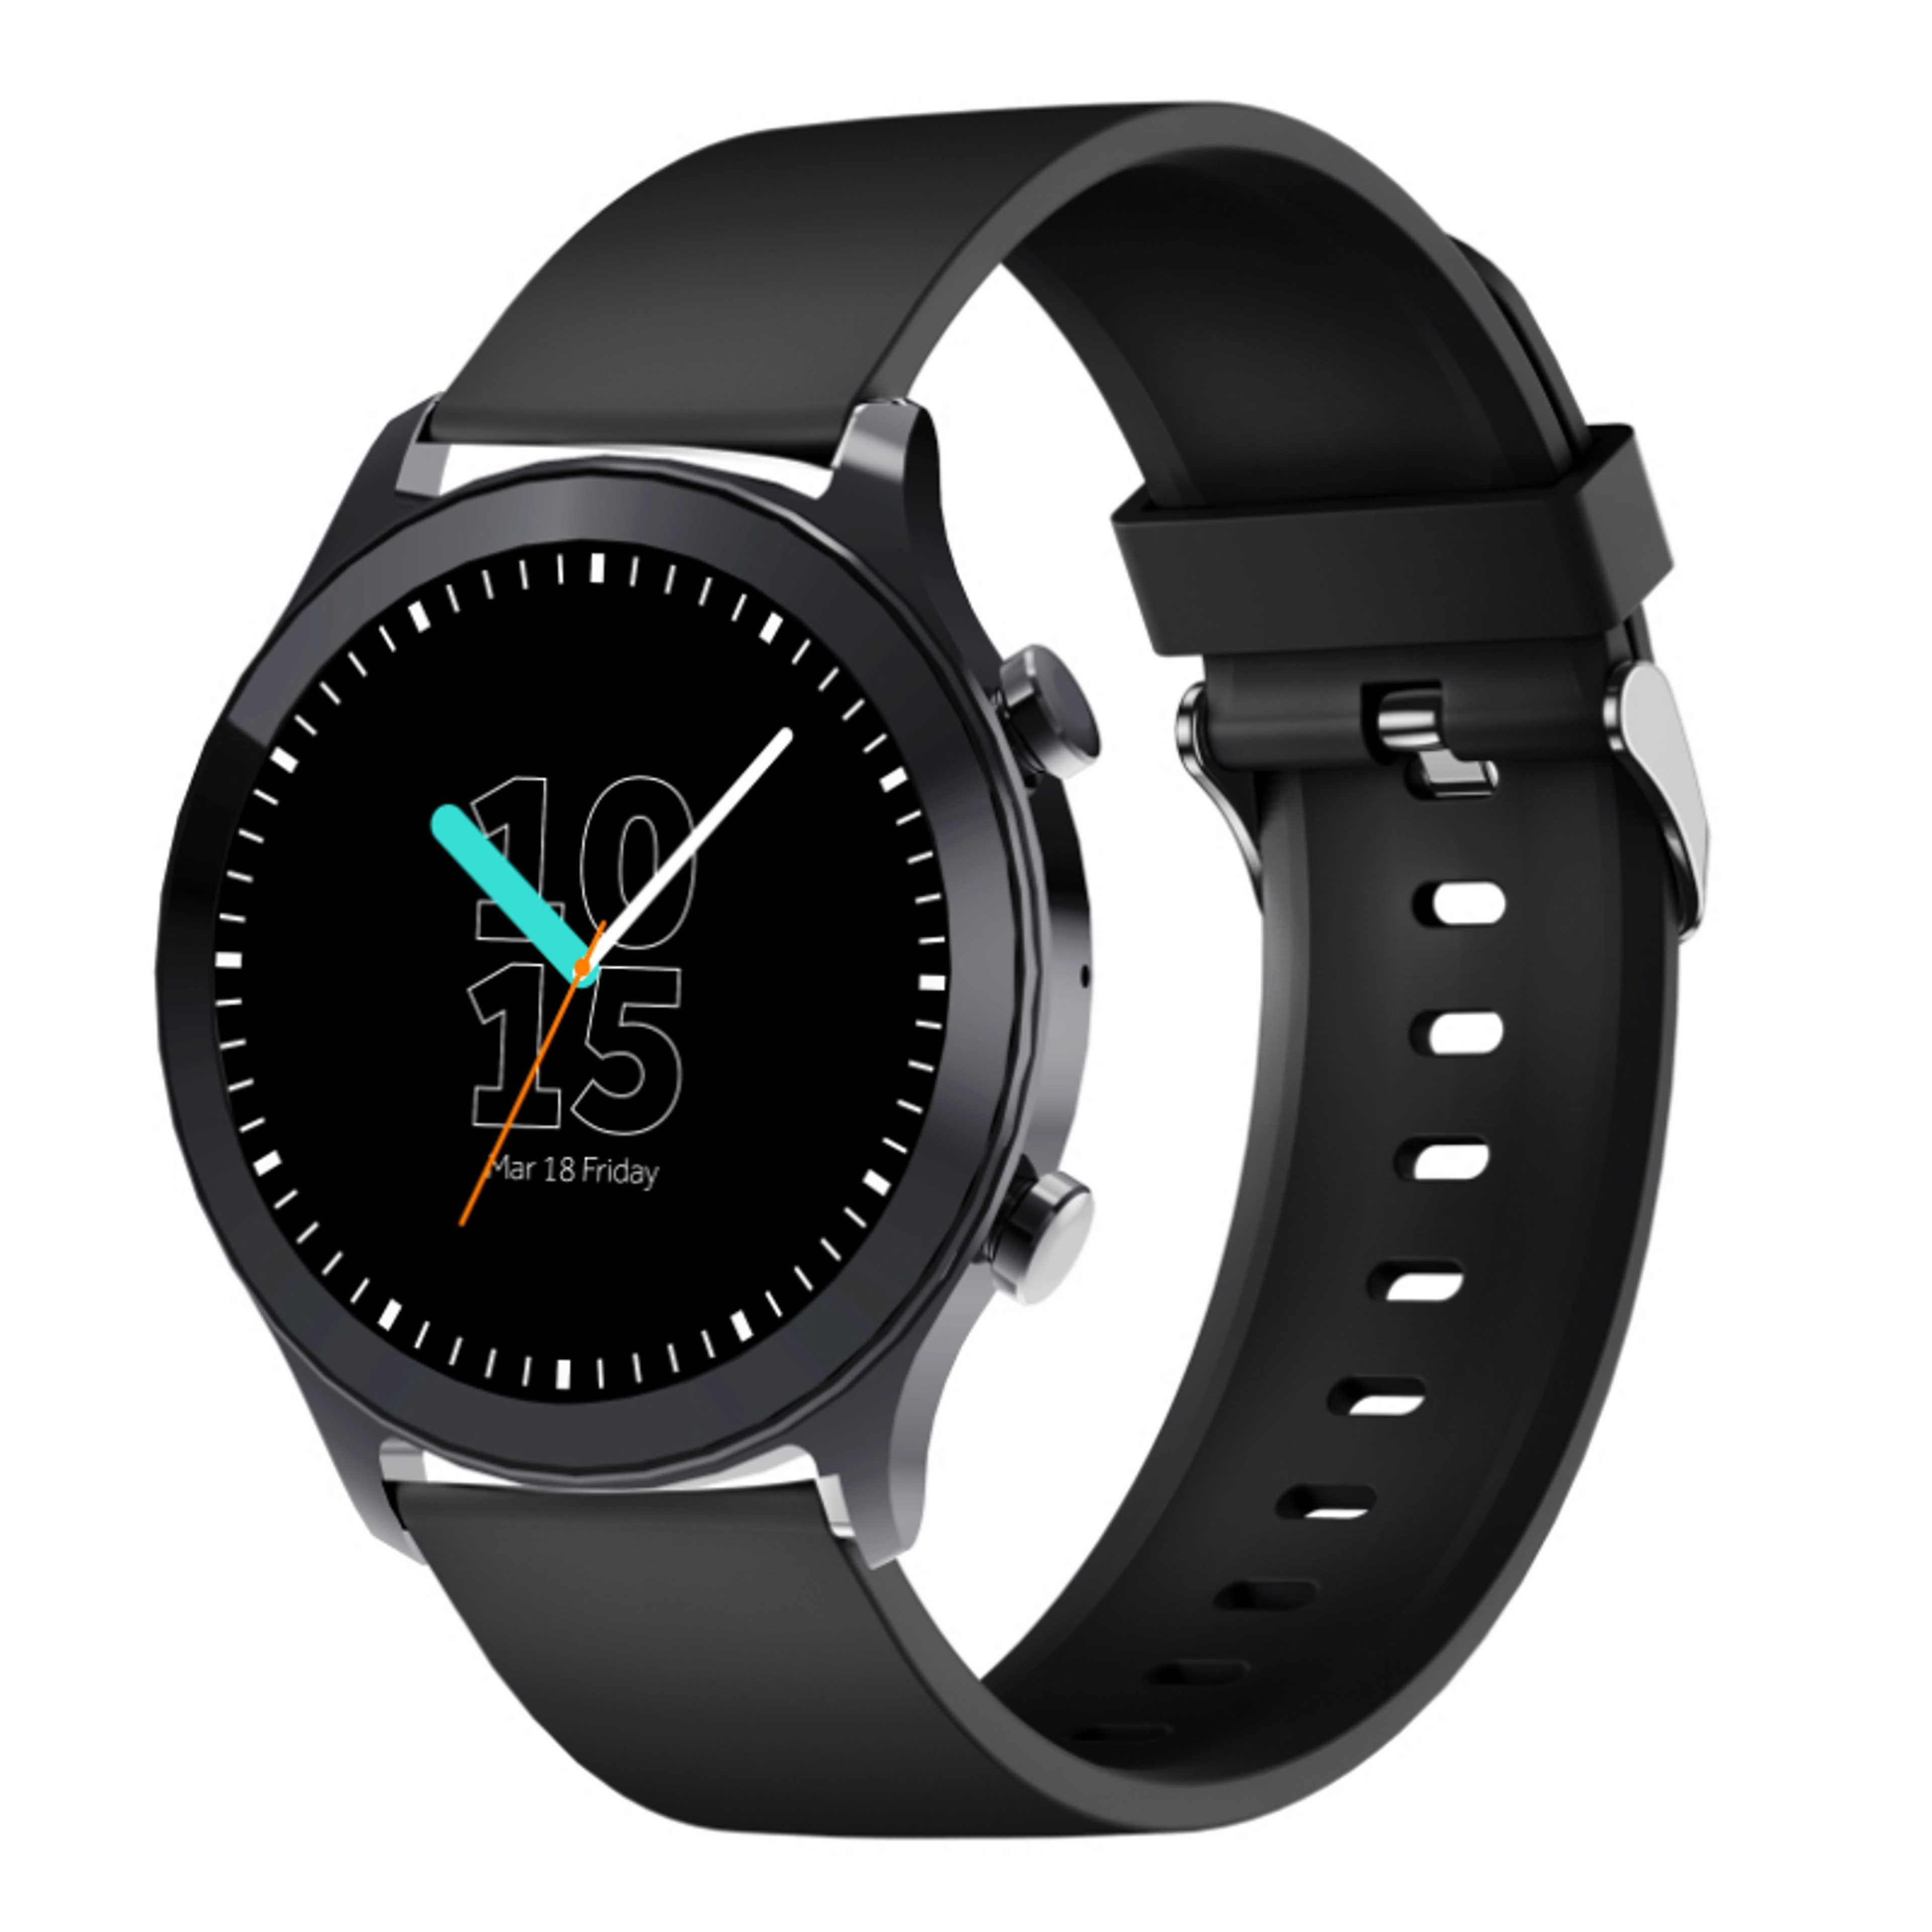 NERV Smart Watch Pro SE, 1.43" Amoled Display Smartwatch, Bluetooth Calling Smart Watch, IP68 Waterproof, 100+ Watch Faces and Fitness Tracking, Always On Display , Heart Rate Monitoring, Sleek Design Smartwatch